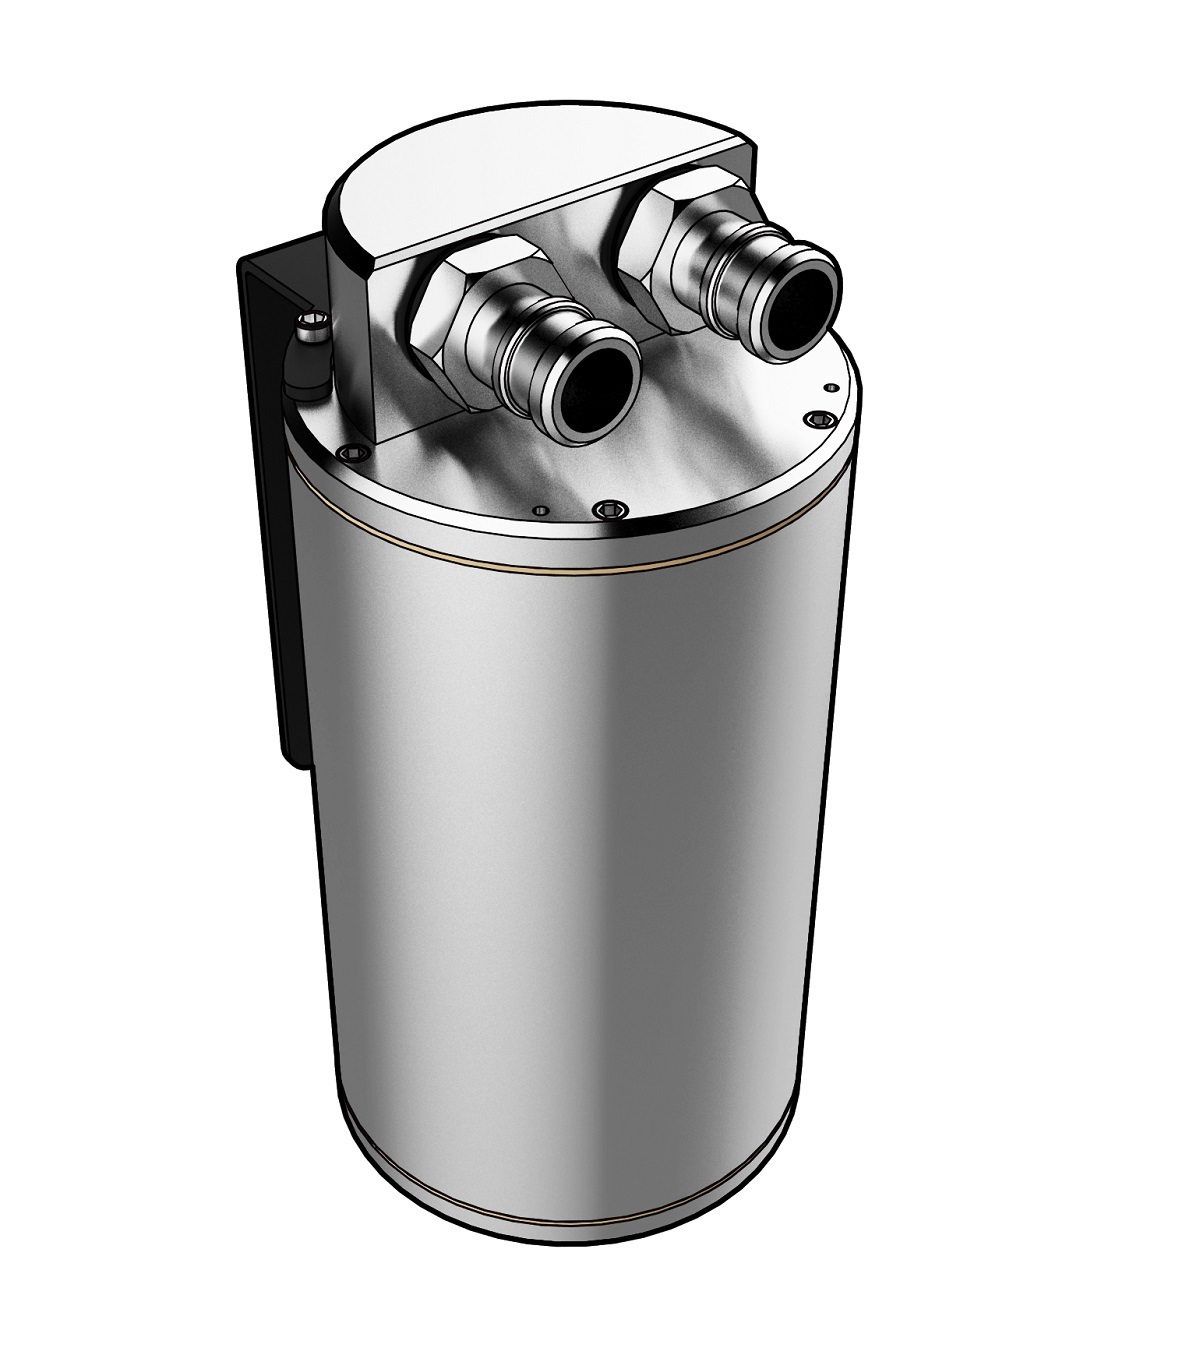 Universal Oil Catch Can - Round